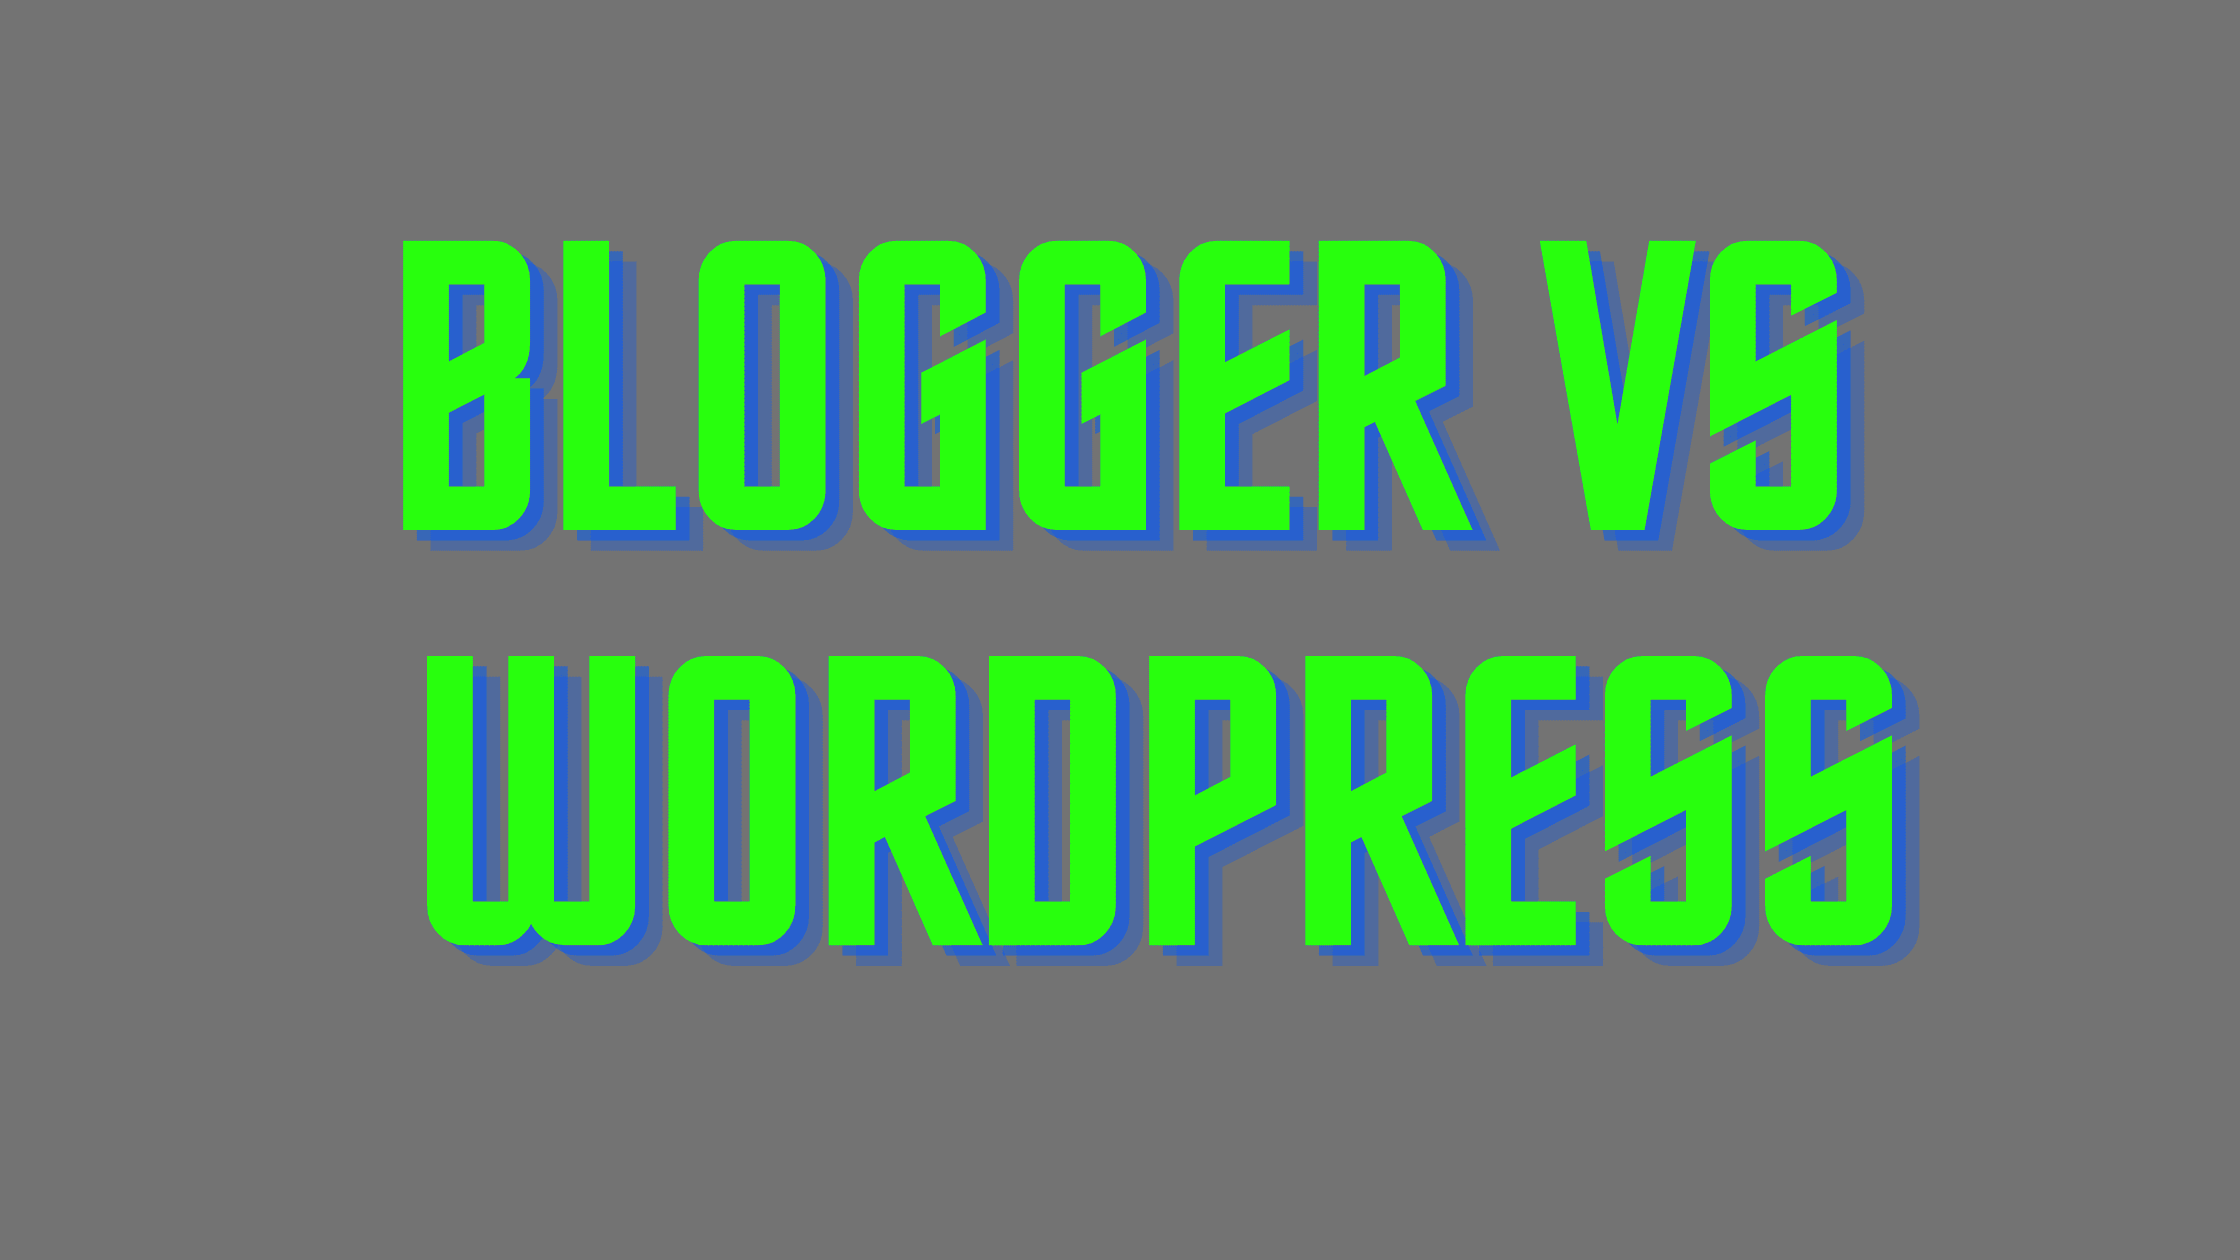 learn about blogger vs WordPress